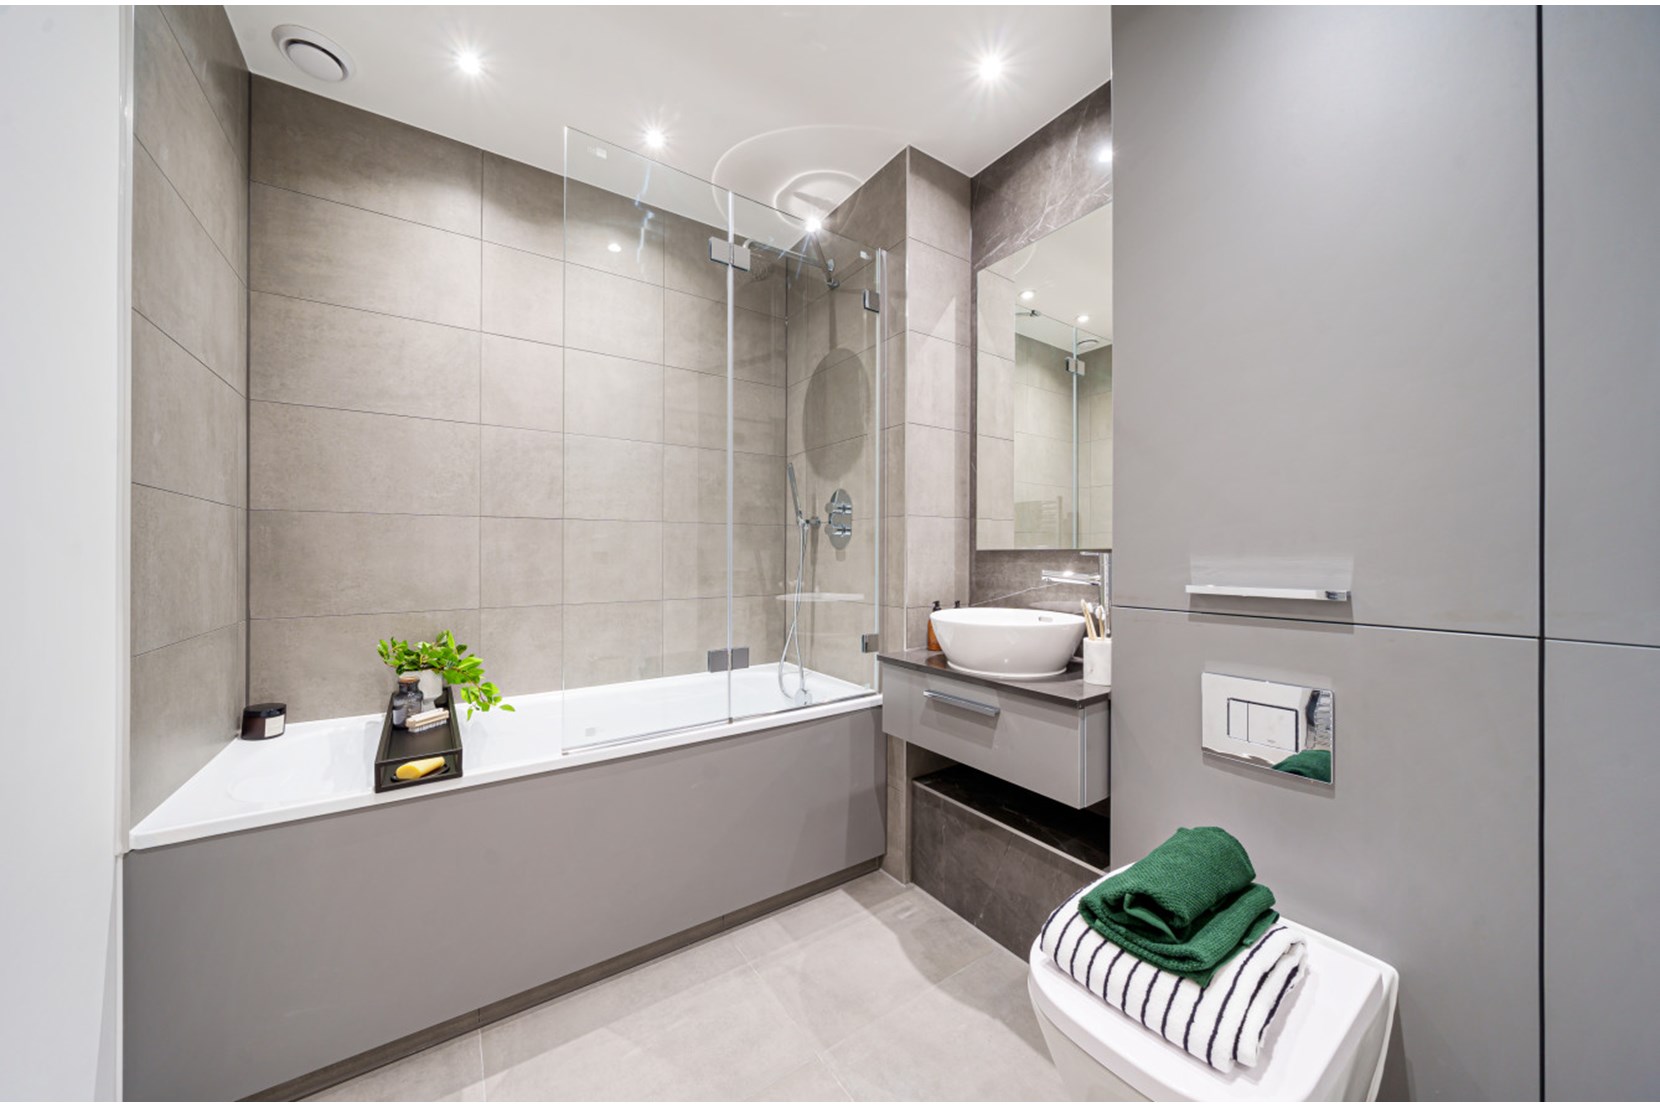 Apartments to Rent by Simple Life London in Anchor's Point, Royal Albert Dock, Newham, E16, bathroom